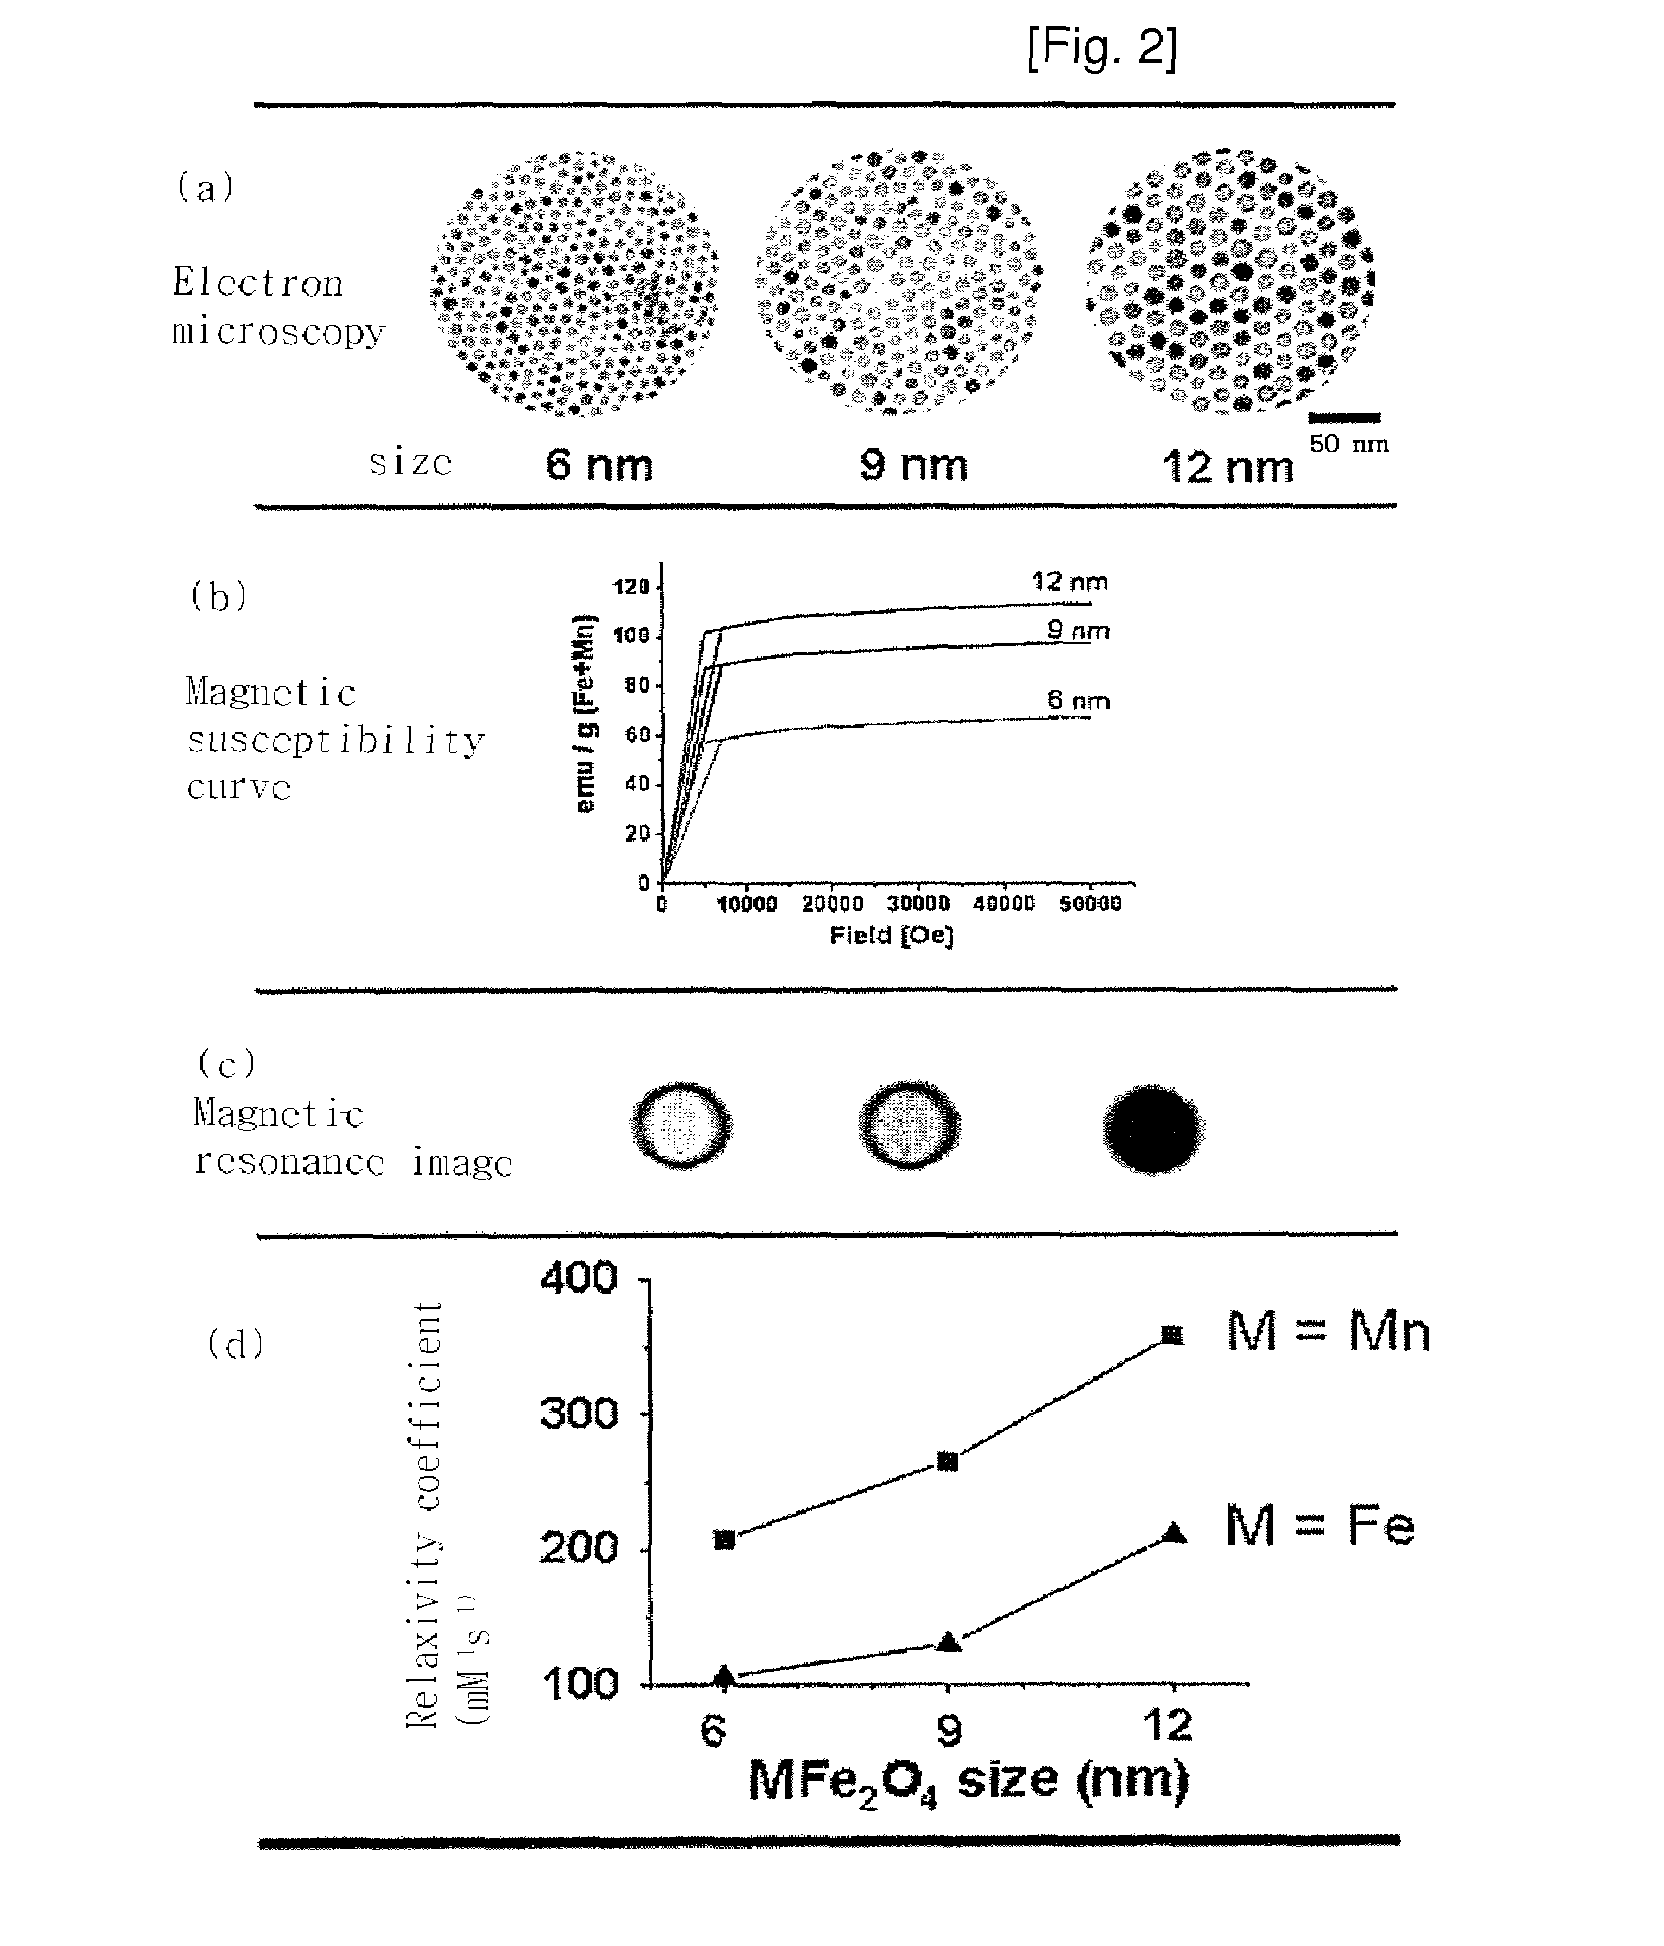 Magnetic resonance imaging contrast agents containing water-soluble nanoparticles of manganese oxide or manganese metal oxide